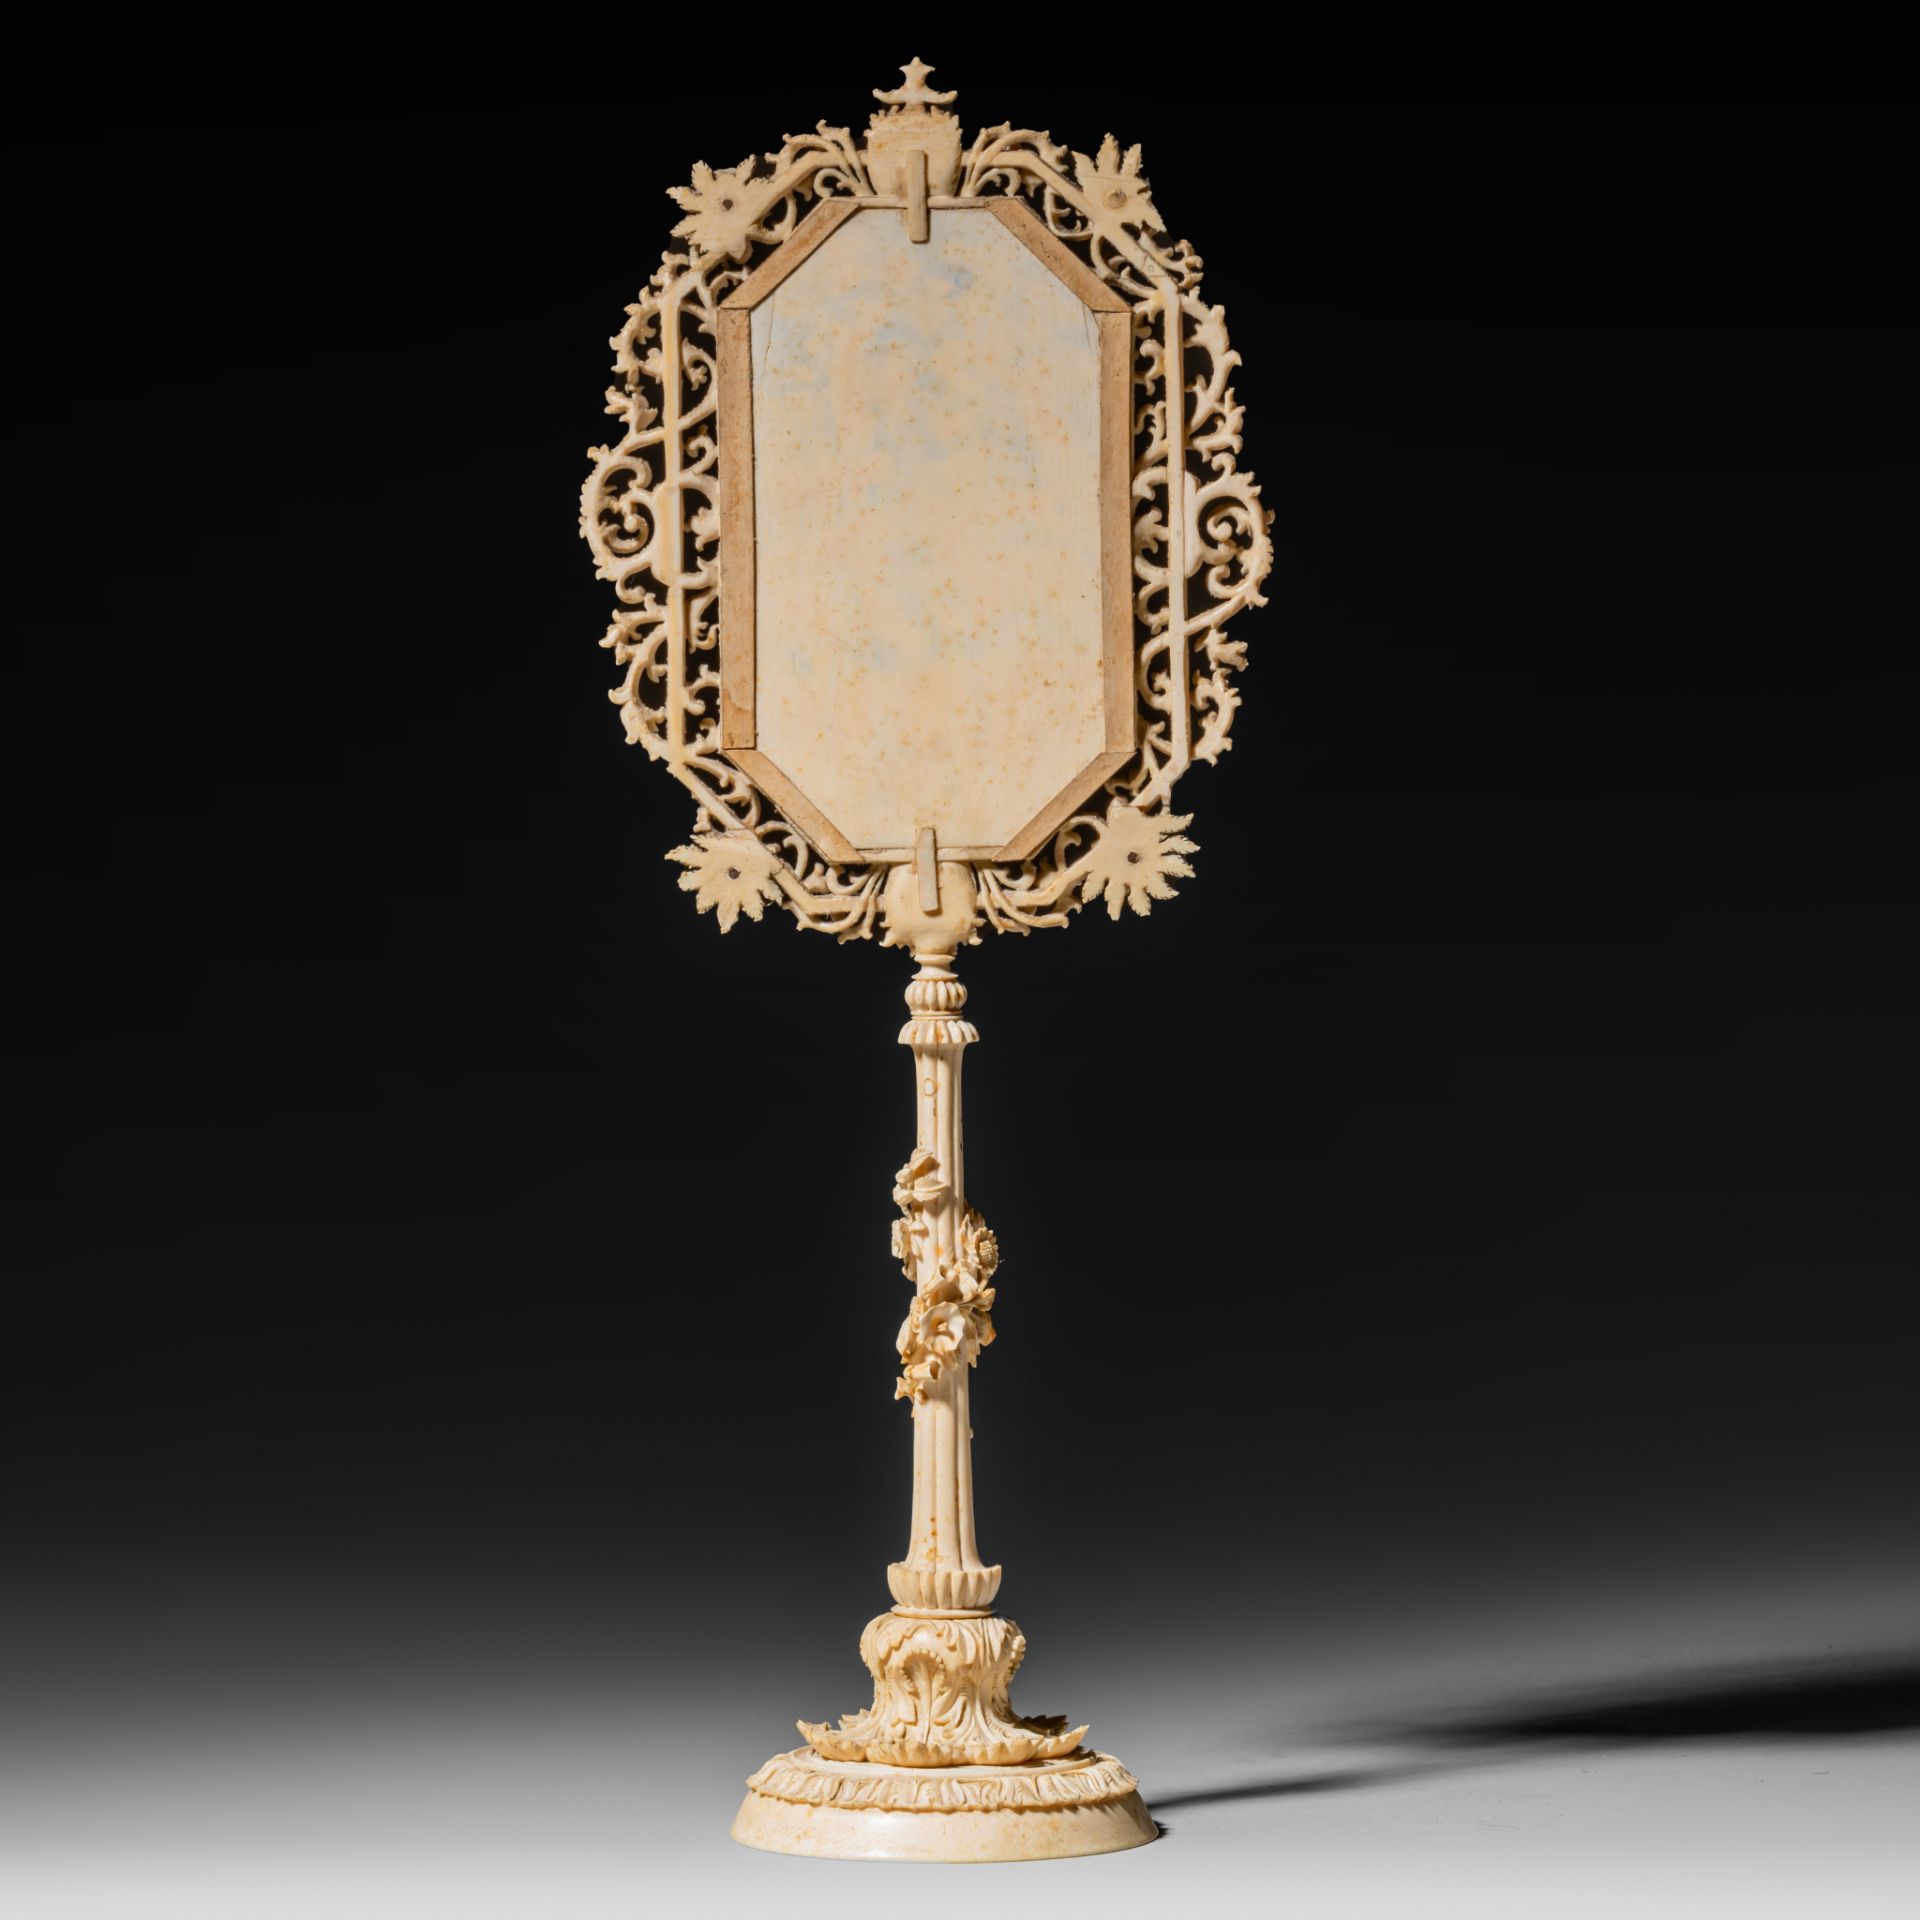 A 19thC, probably German, richly carved ivory candle screen, H 43,5 cm - 491 g (+) - Image 4 of 6